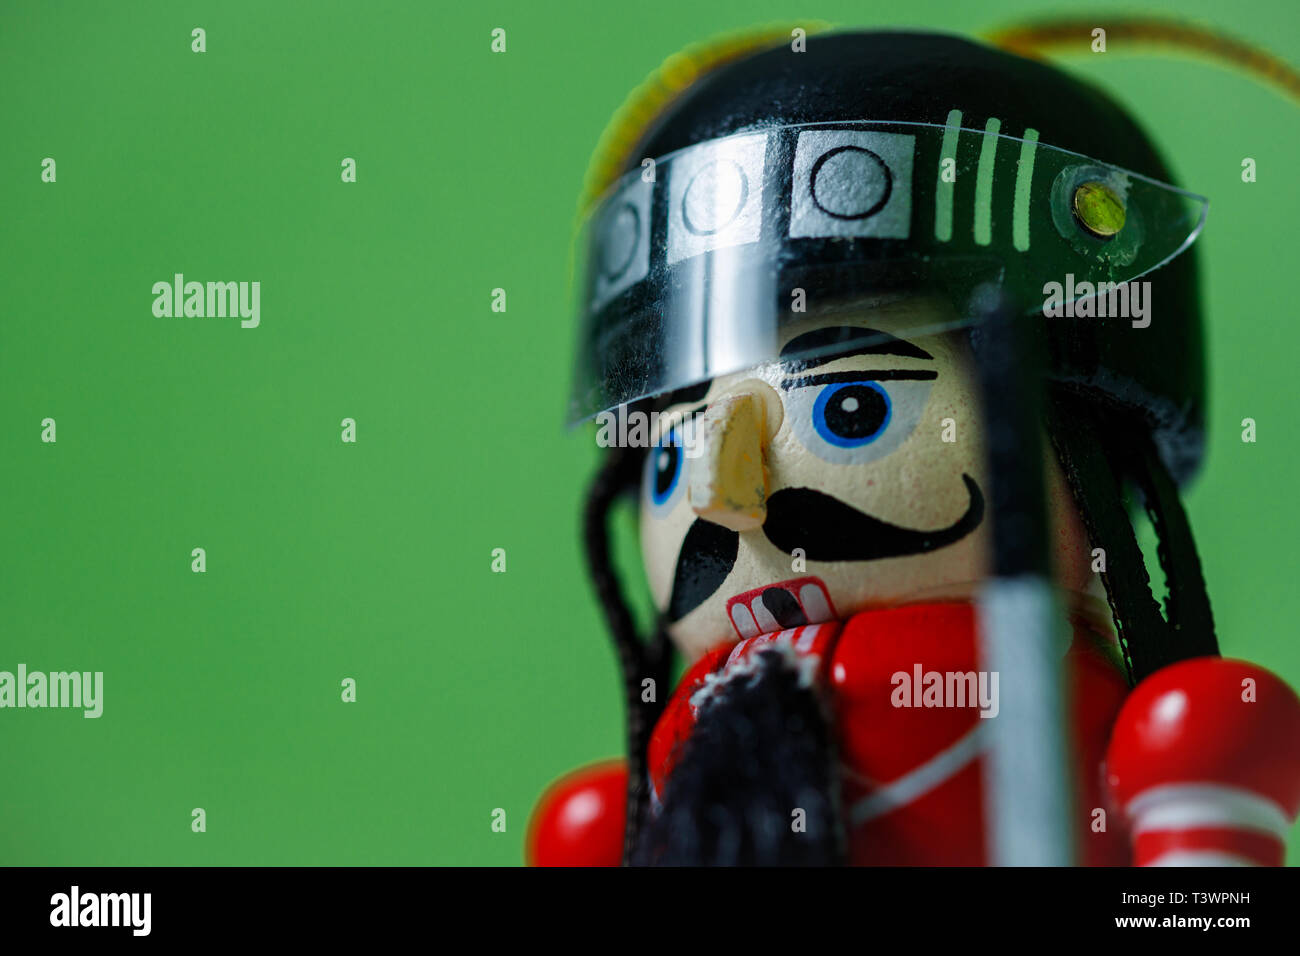 Side view of a nutcracker soldier on against a green background. Nutcracker soldier figurine in helmet. Stock Photo